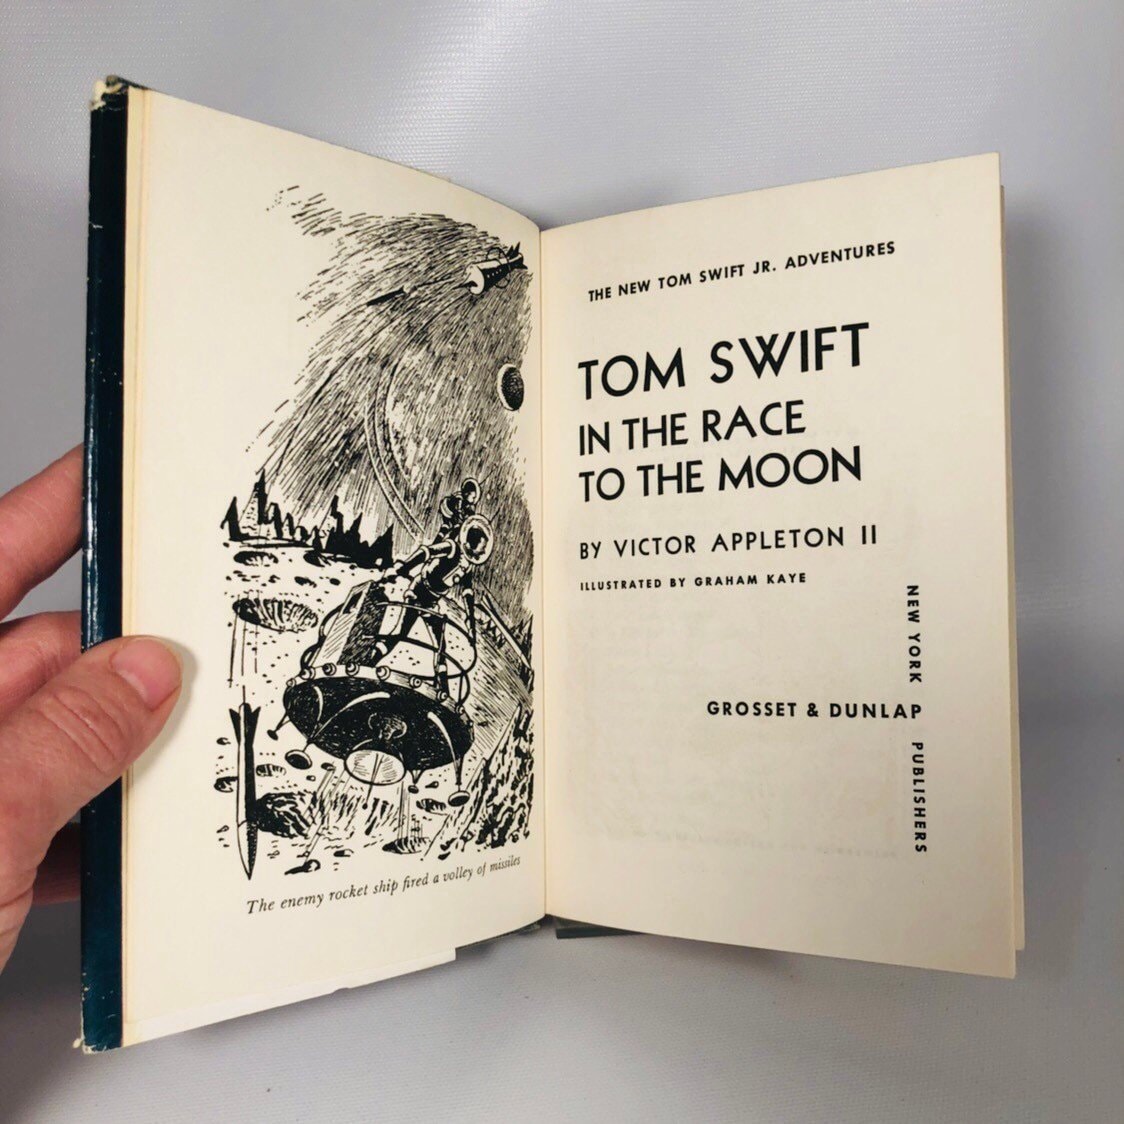 Tom Swift in the Race to the Moon by Victor Appleton 1958 The New Tom Swift Jr. AdventuresVintage Book